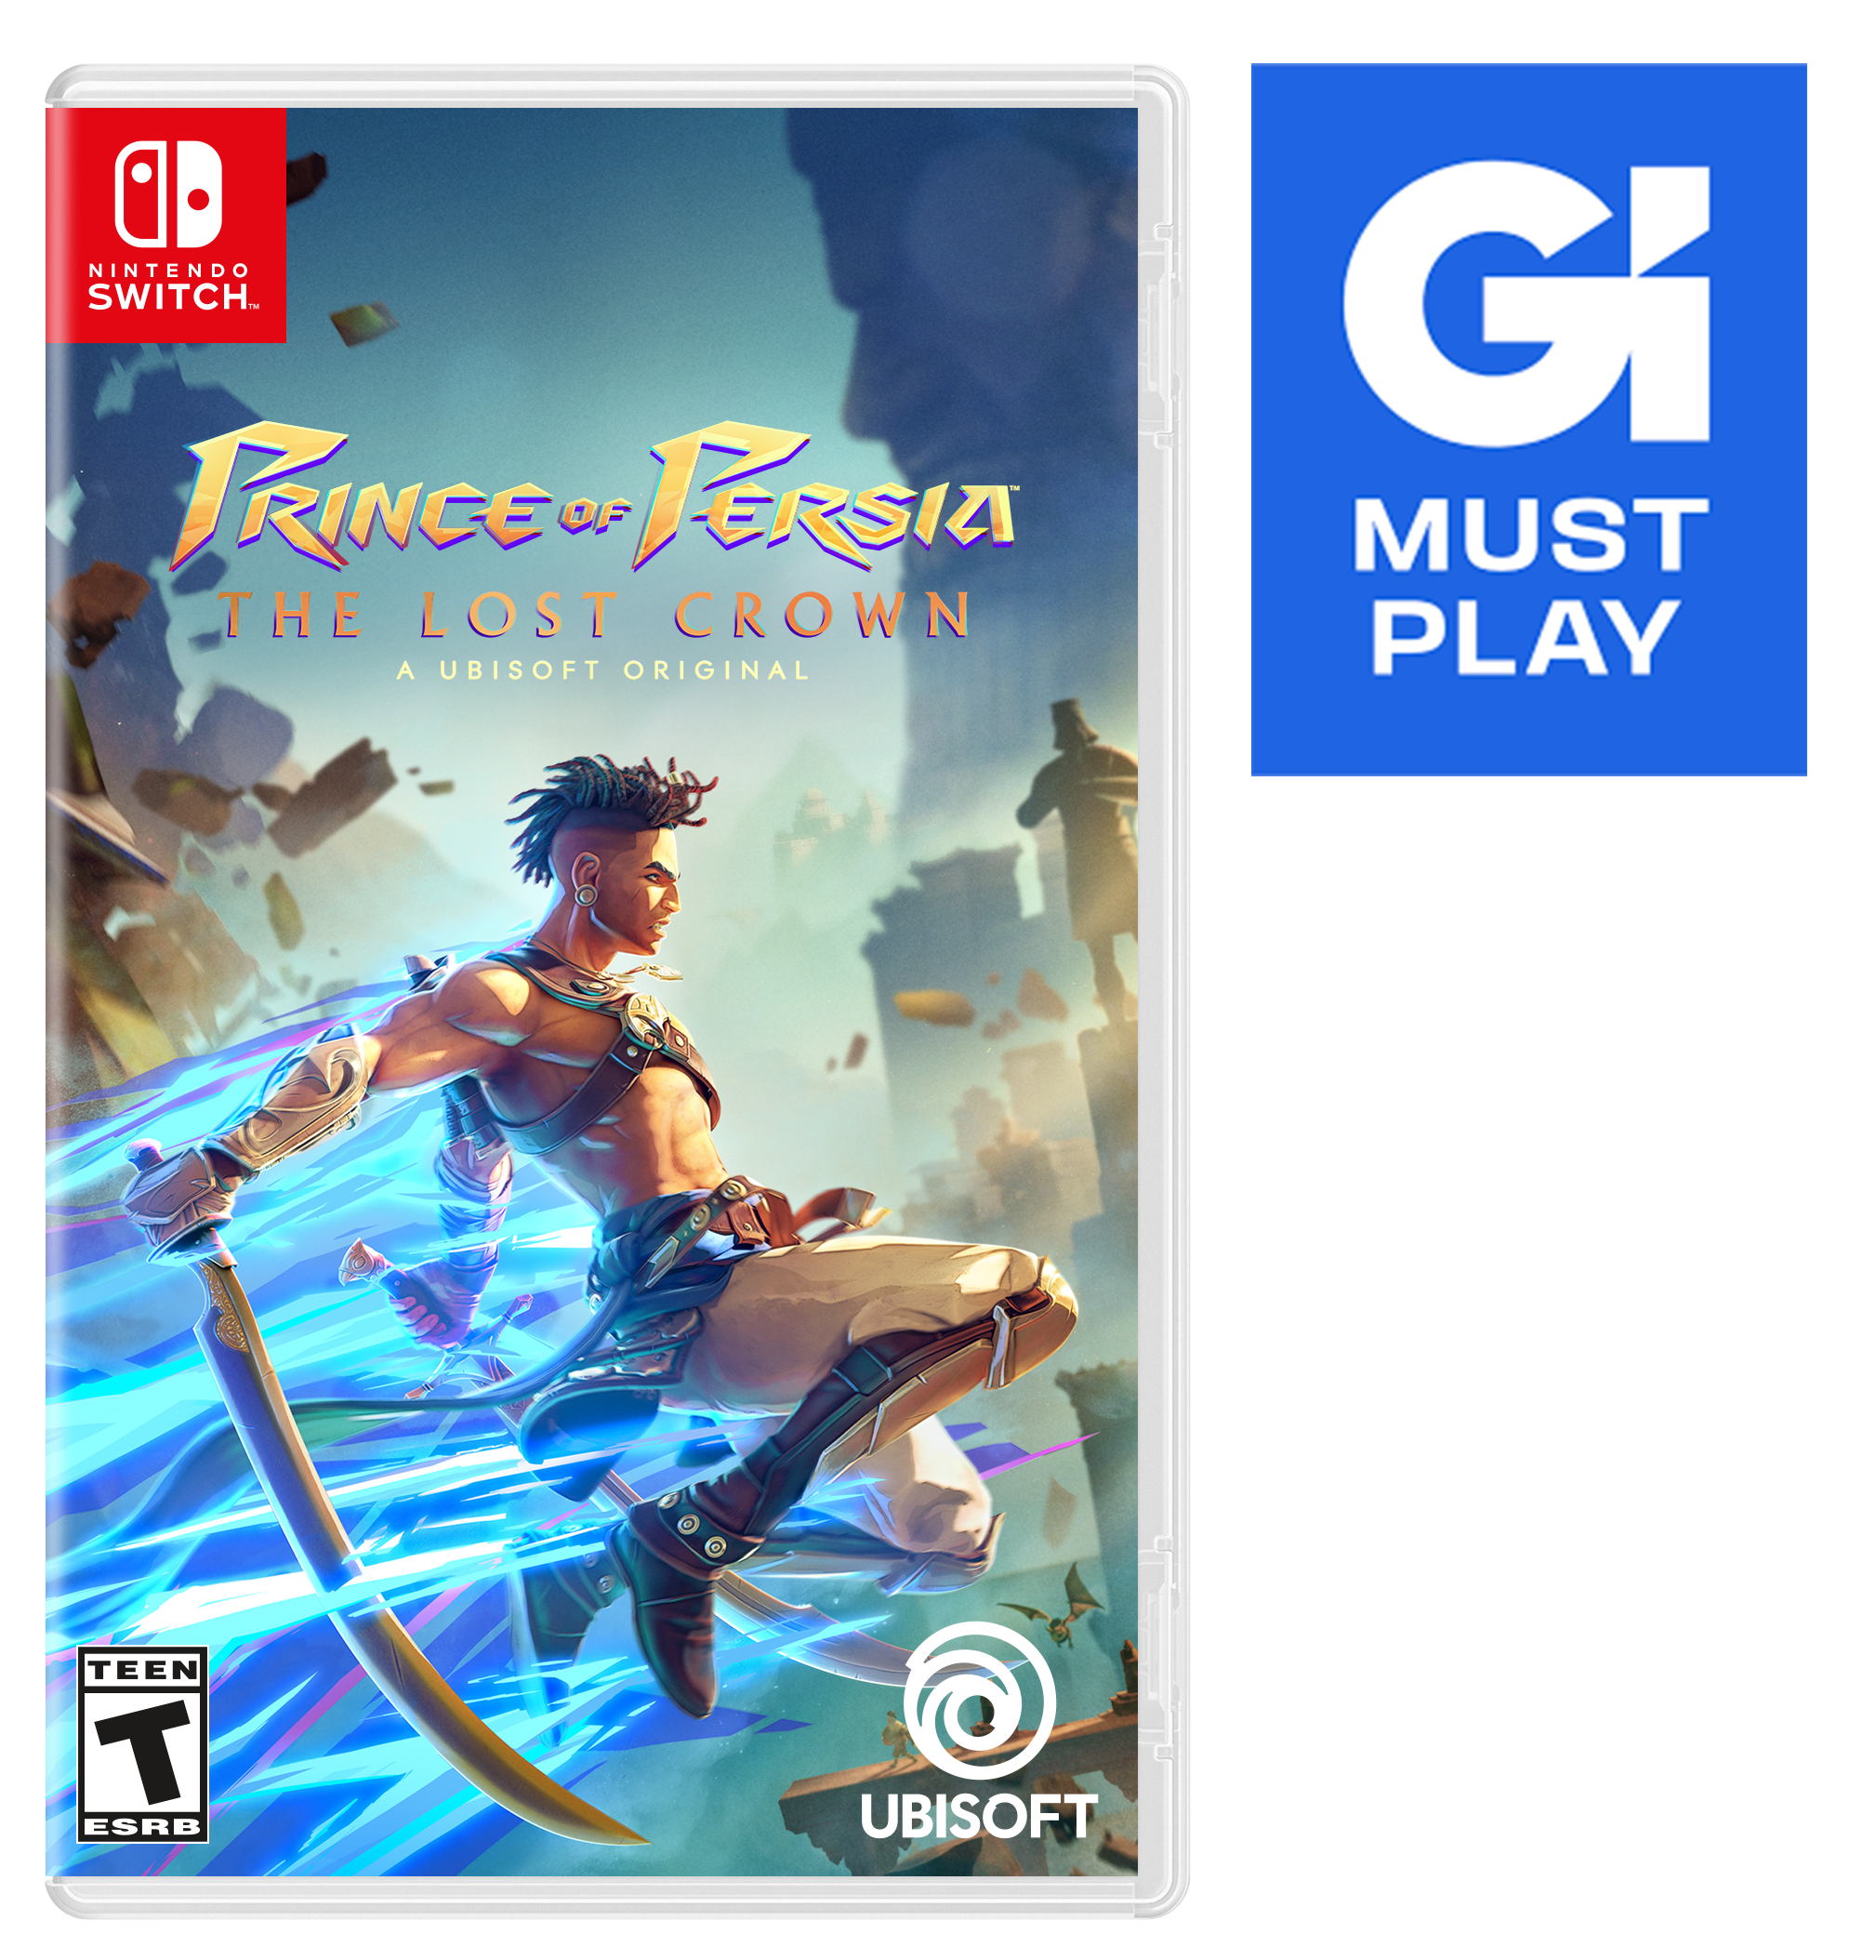 Prince of Persia The Lost Crown Deluxe Edition for Nintendo Switch